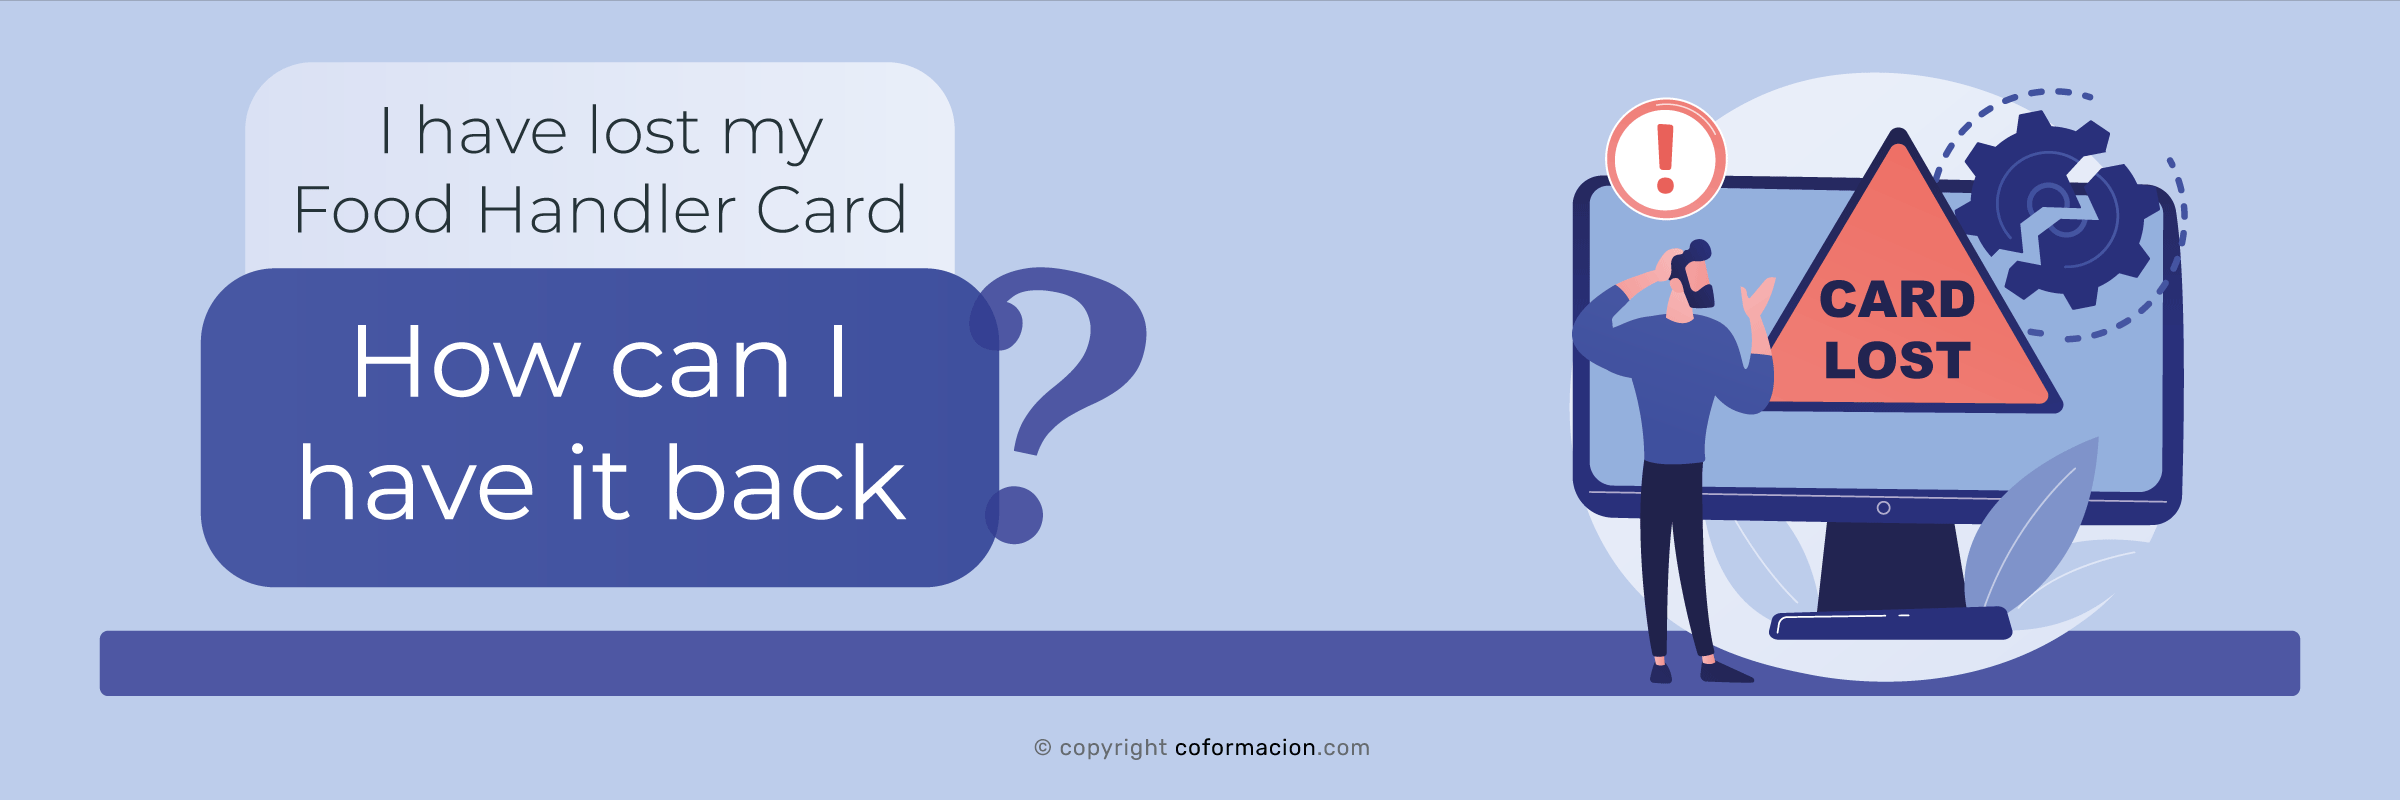 I have lost my Food Handler Card. How can I have it back?